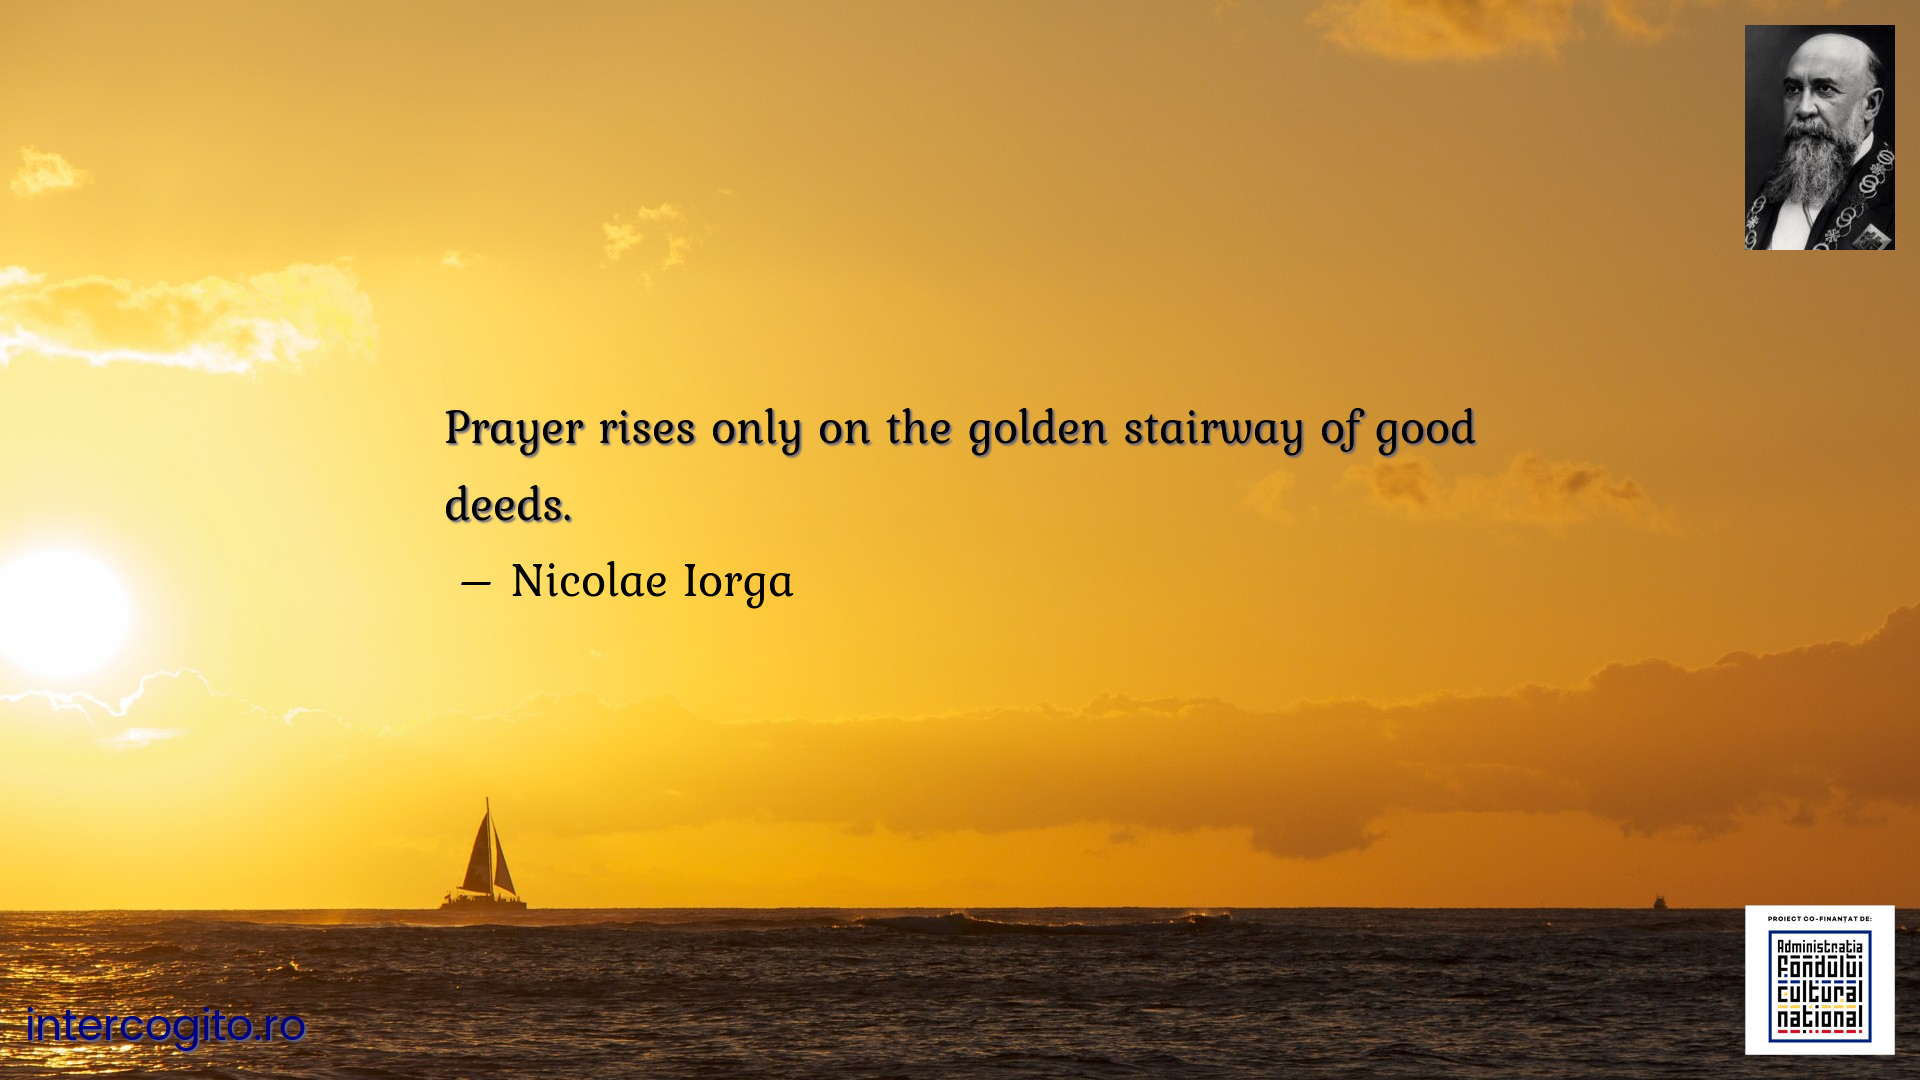 Prayer rises only on the golden stairway of good deeds.